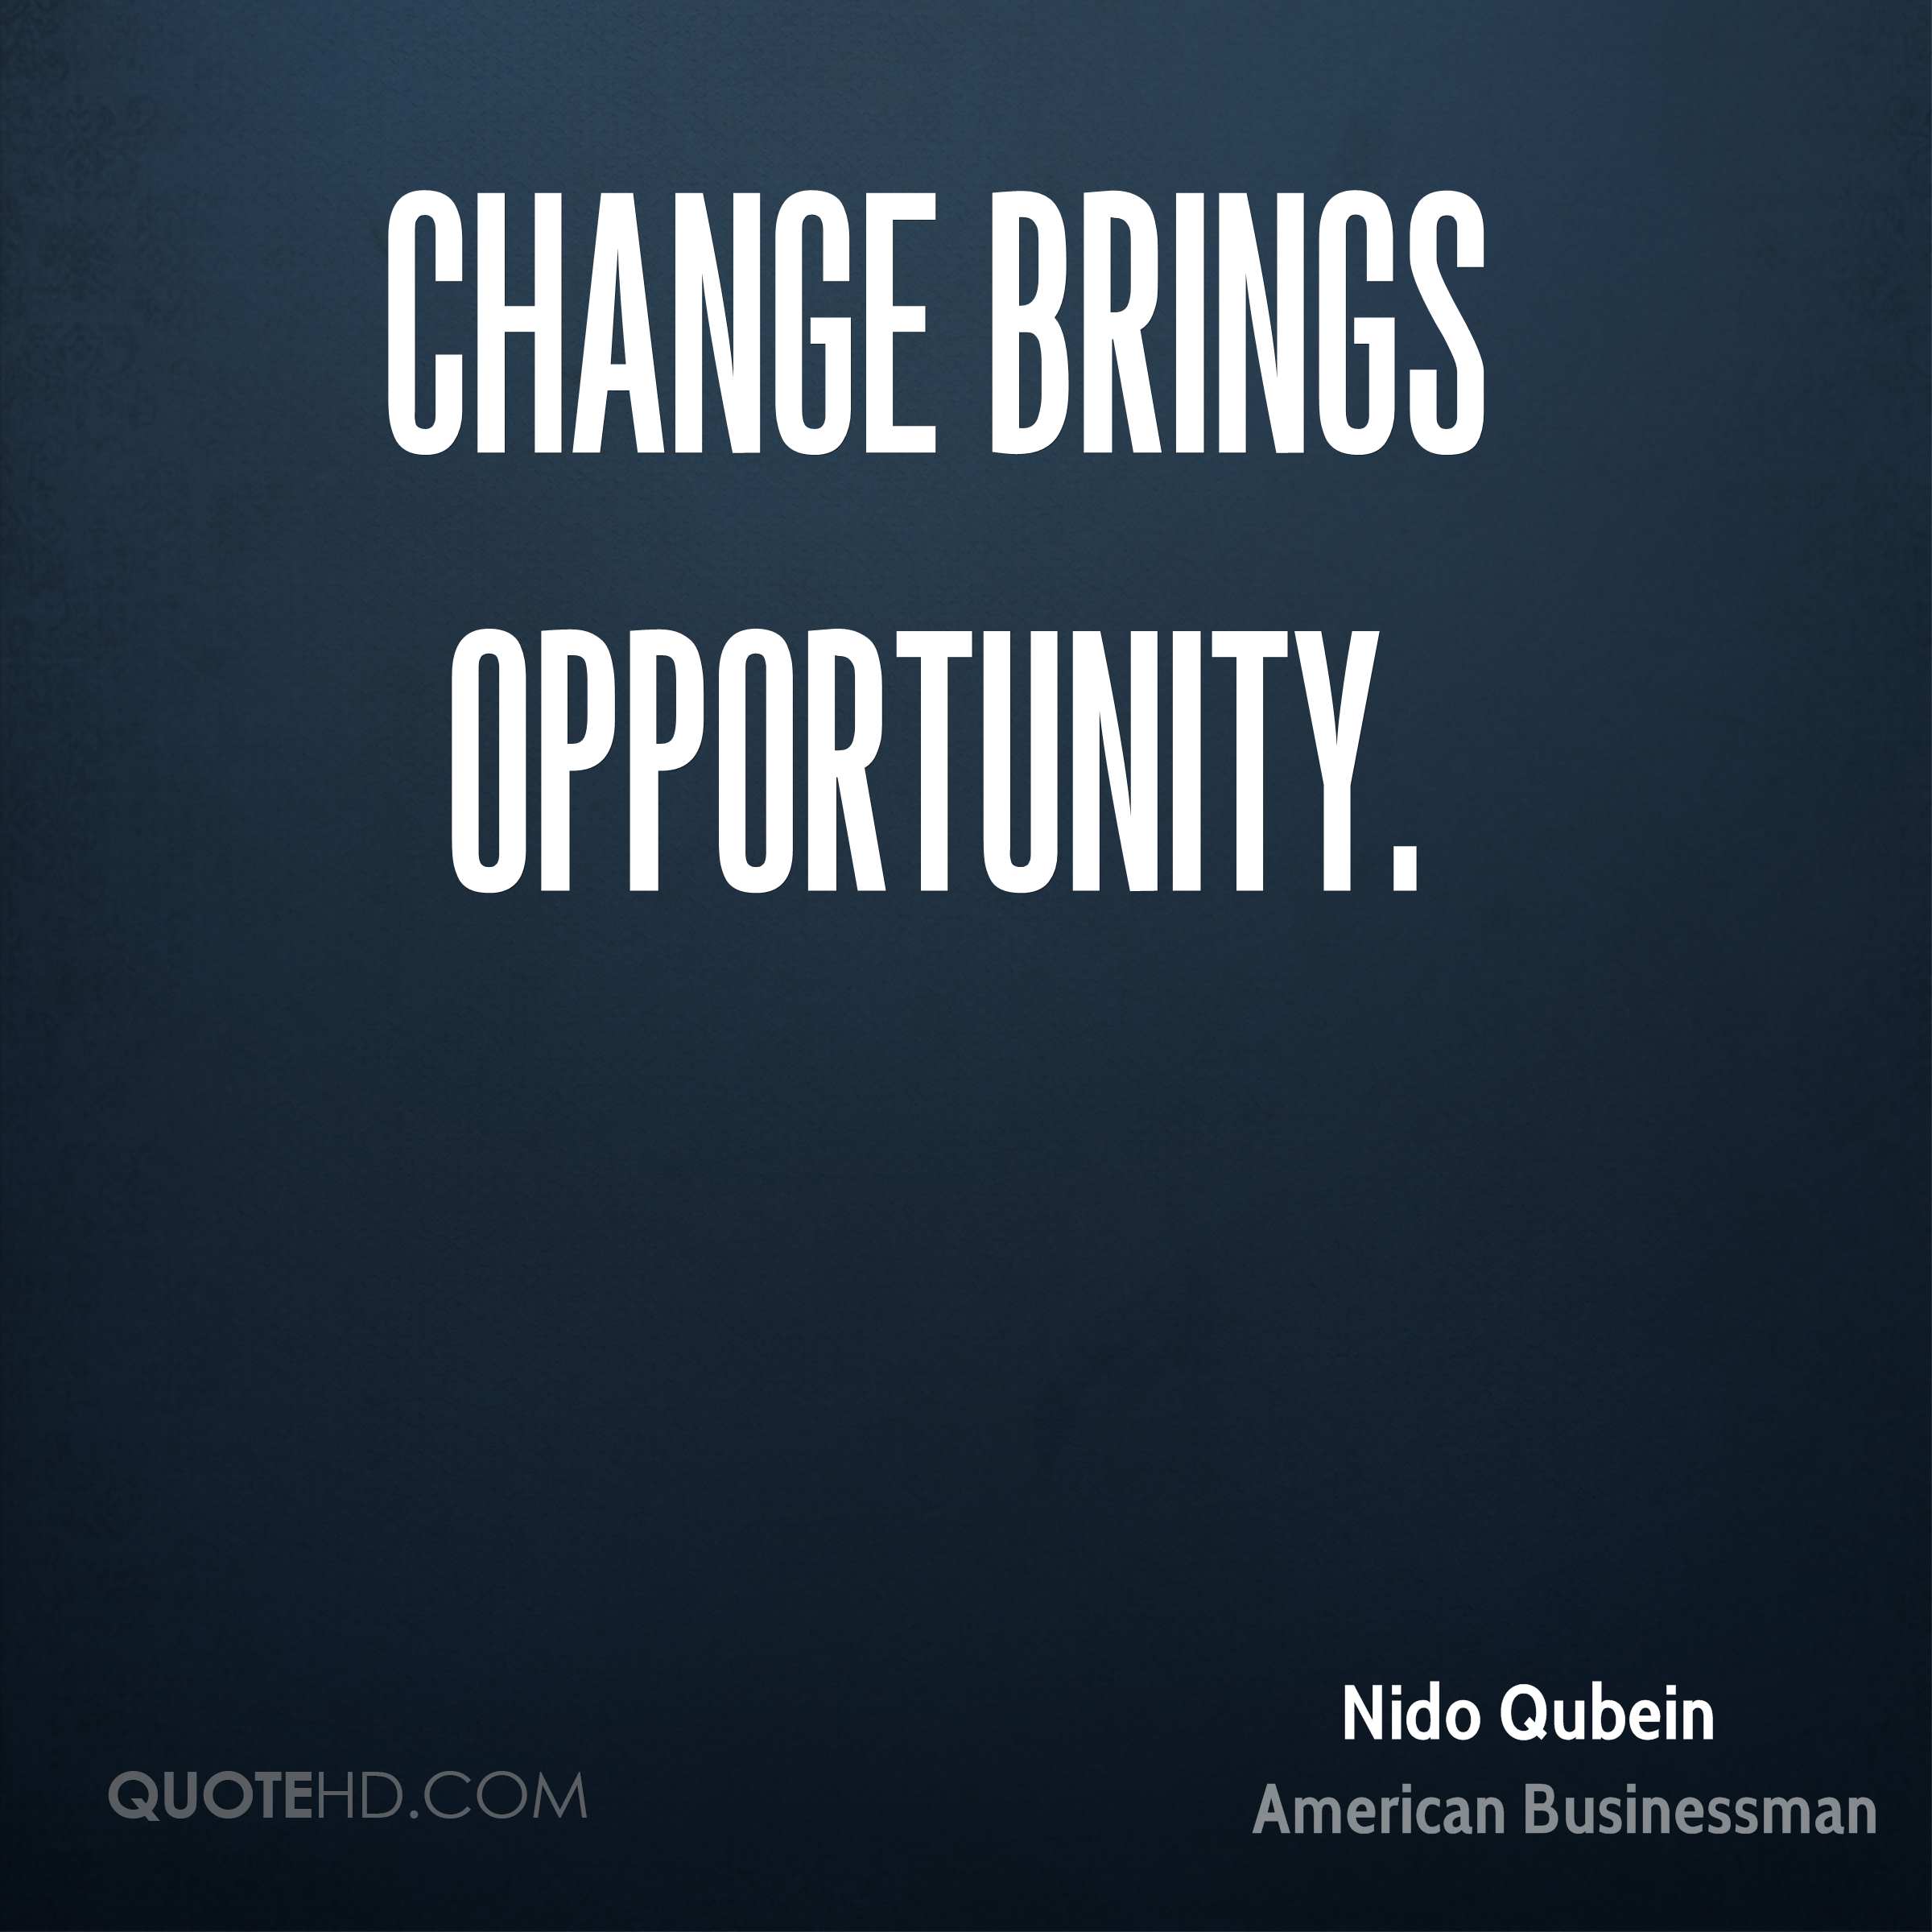 Change brings opportunity. Nido Qubein